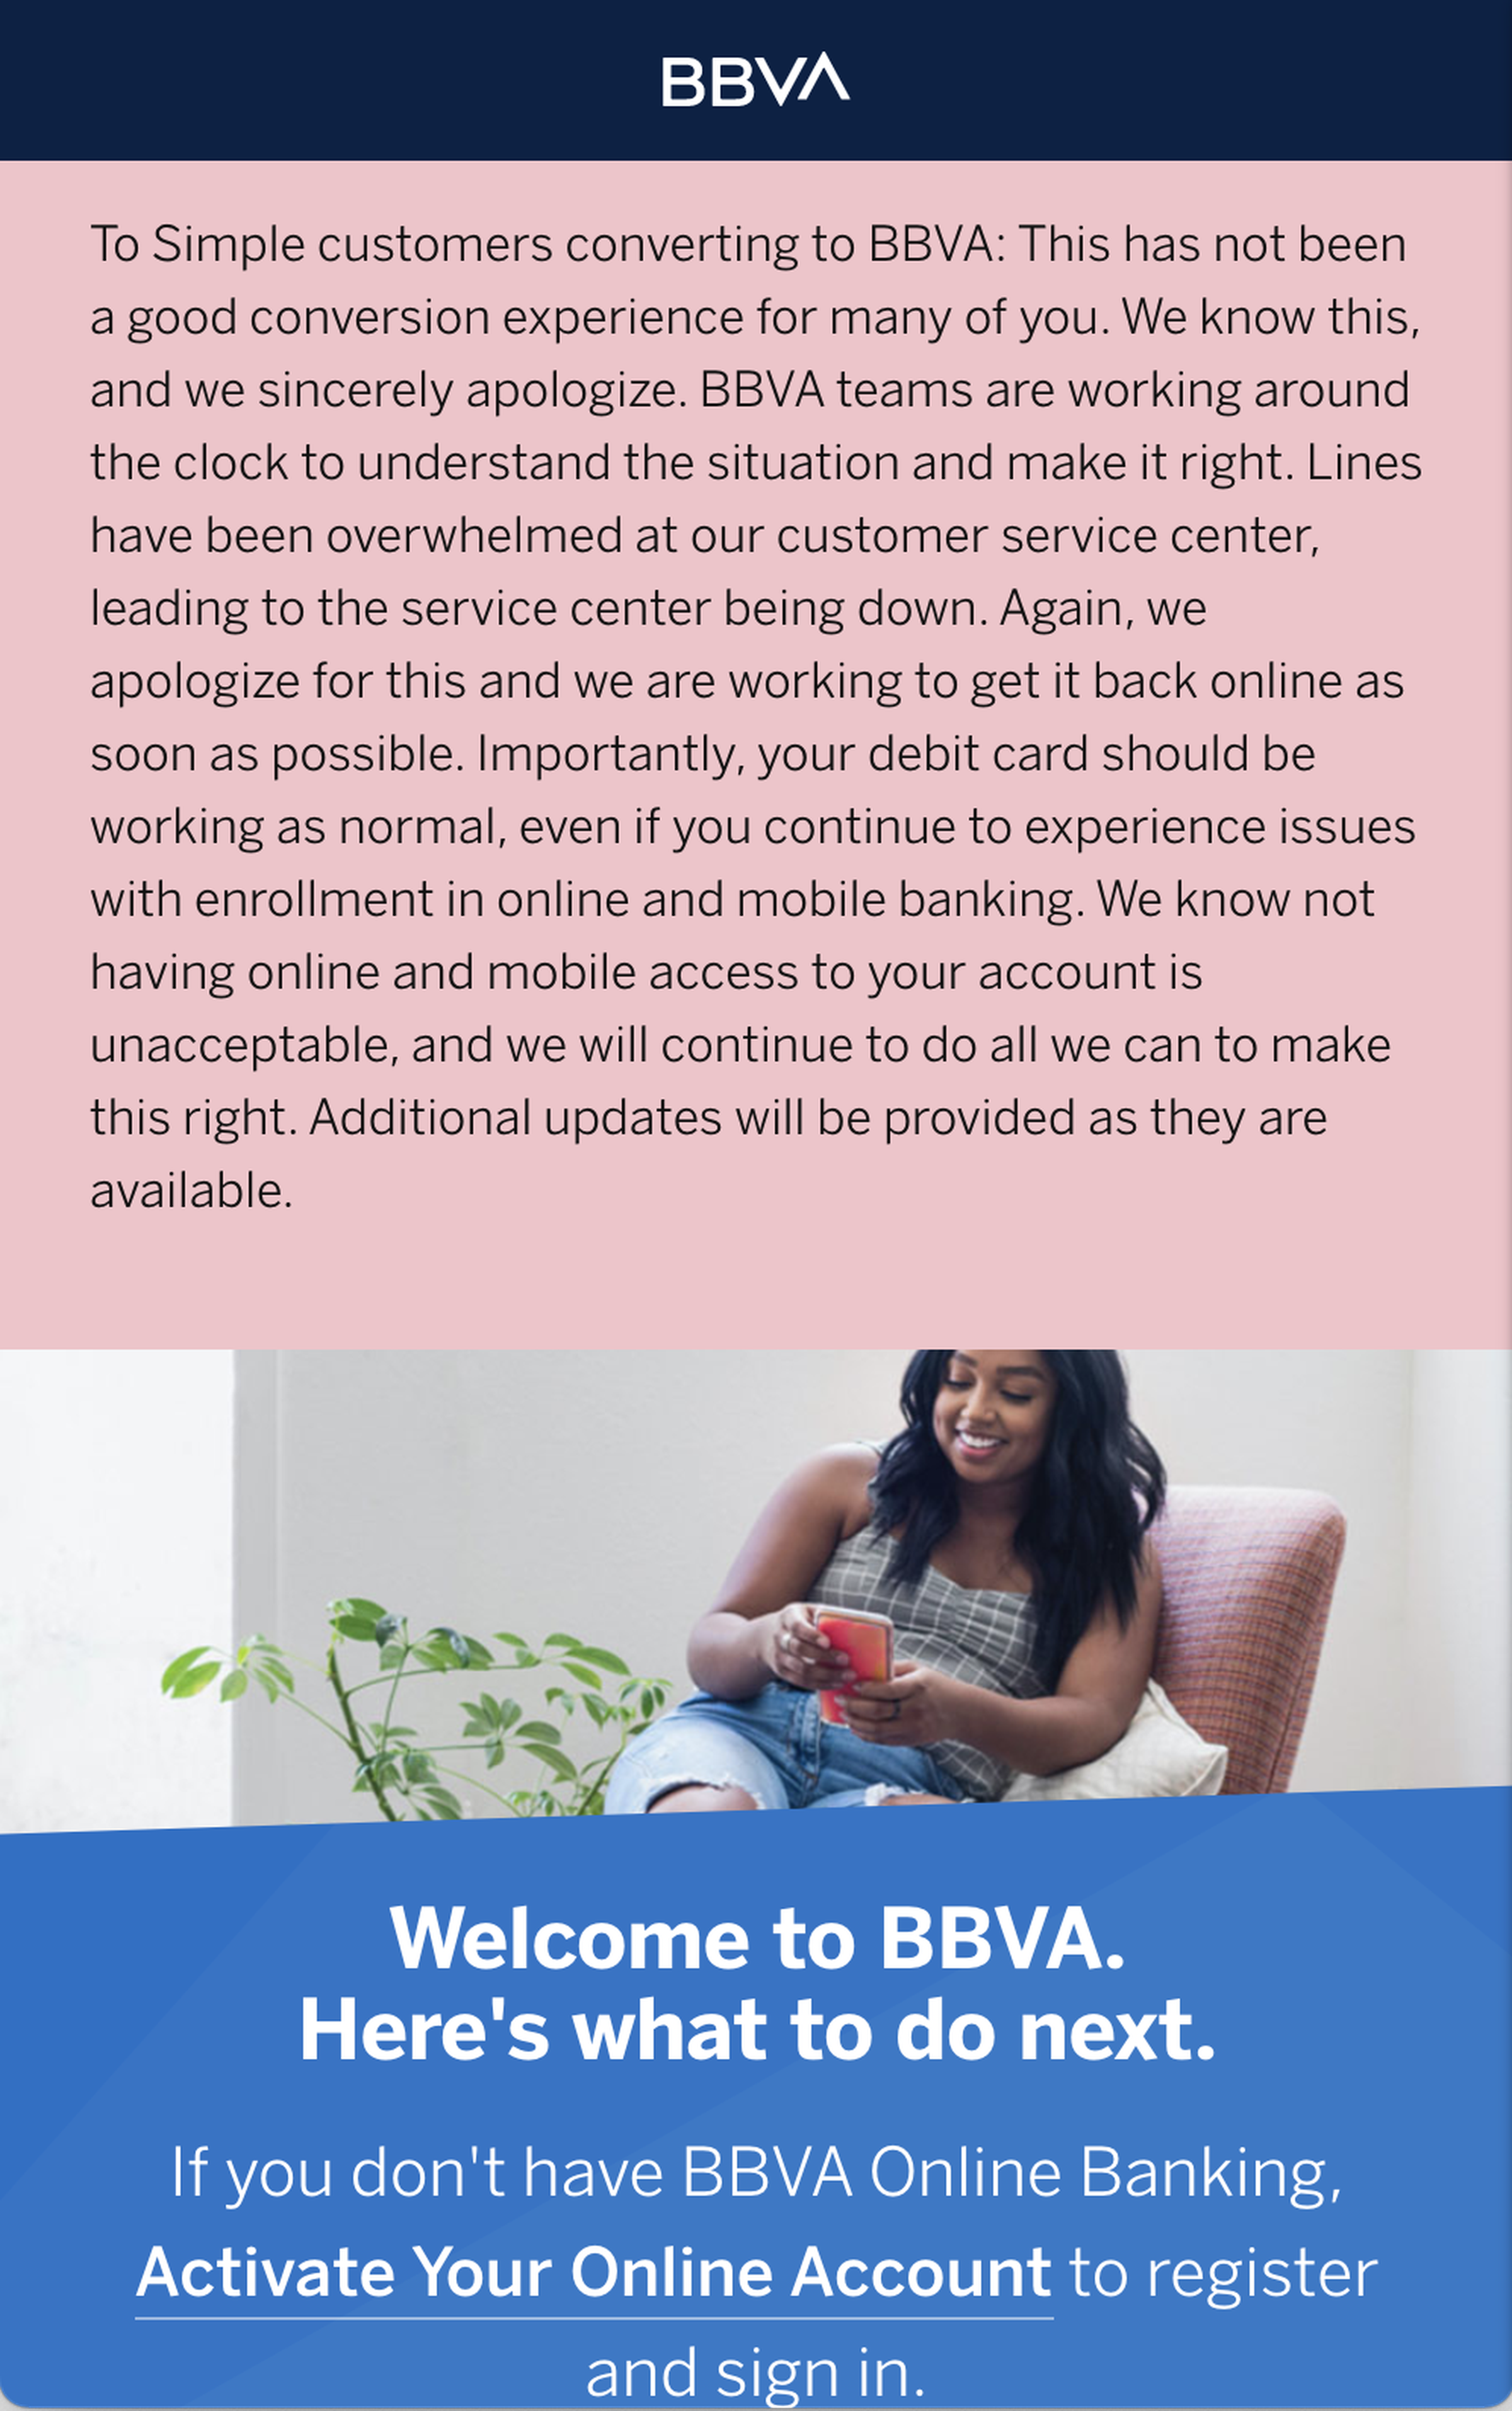 A banner on BBVA’s website reading in part, “To Simple customers converting to BBVA: This has not been a good conversion experience for many of you. We know this, and we sincerely apologize. BBVA teams are working around the clock to understand the situation and make it right. Lines have been overwhelmed at our customer service center, leading to the service center being down. Again, we apologize for this and we are working to get it back online as soon as possible.”